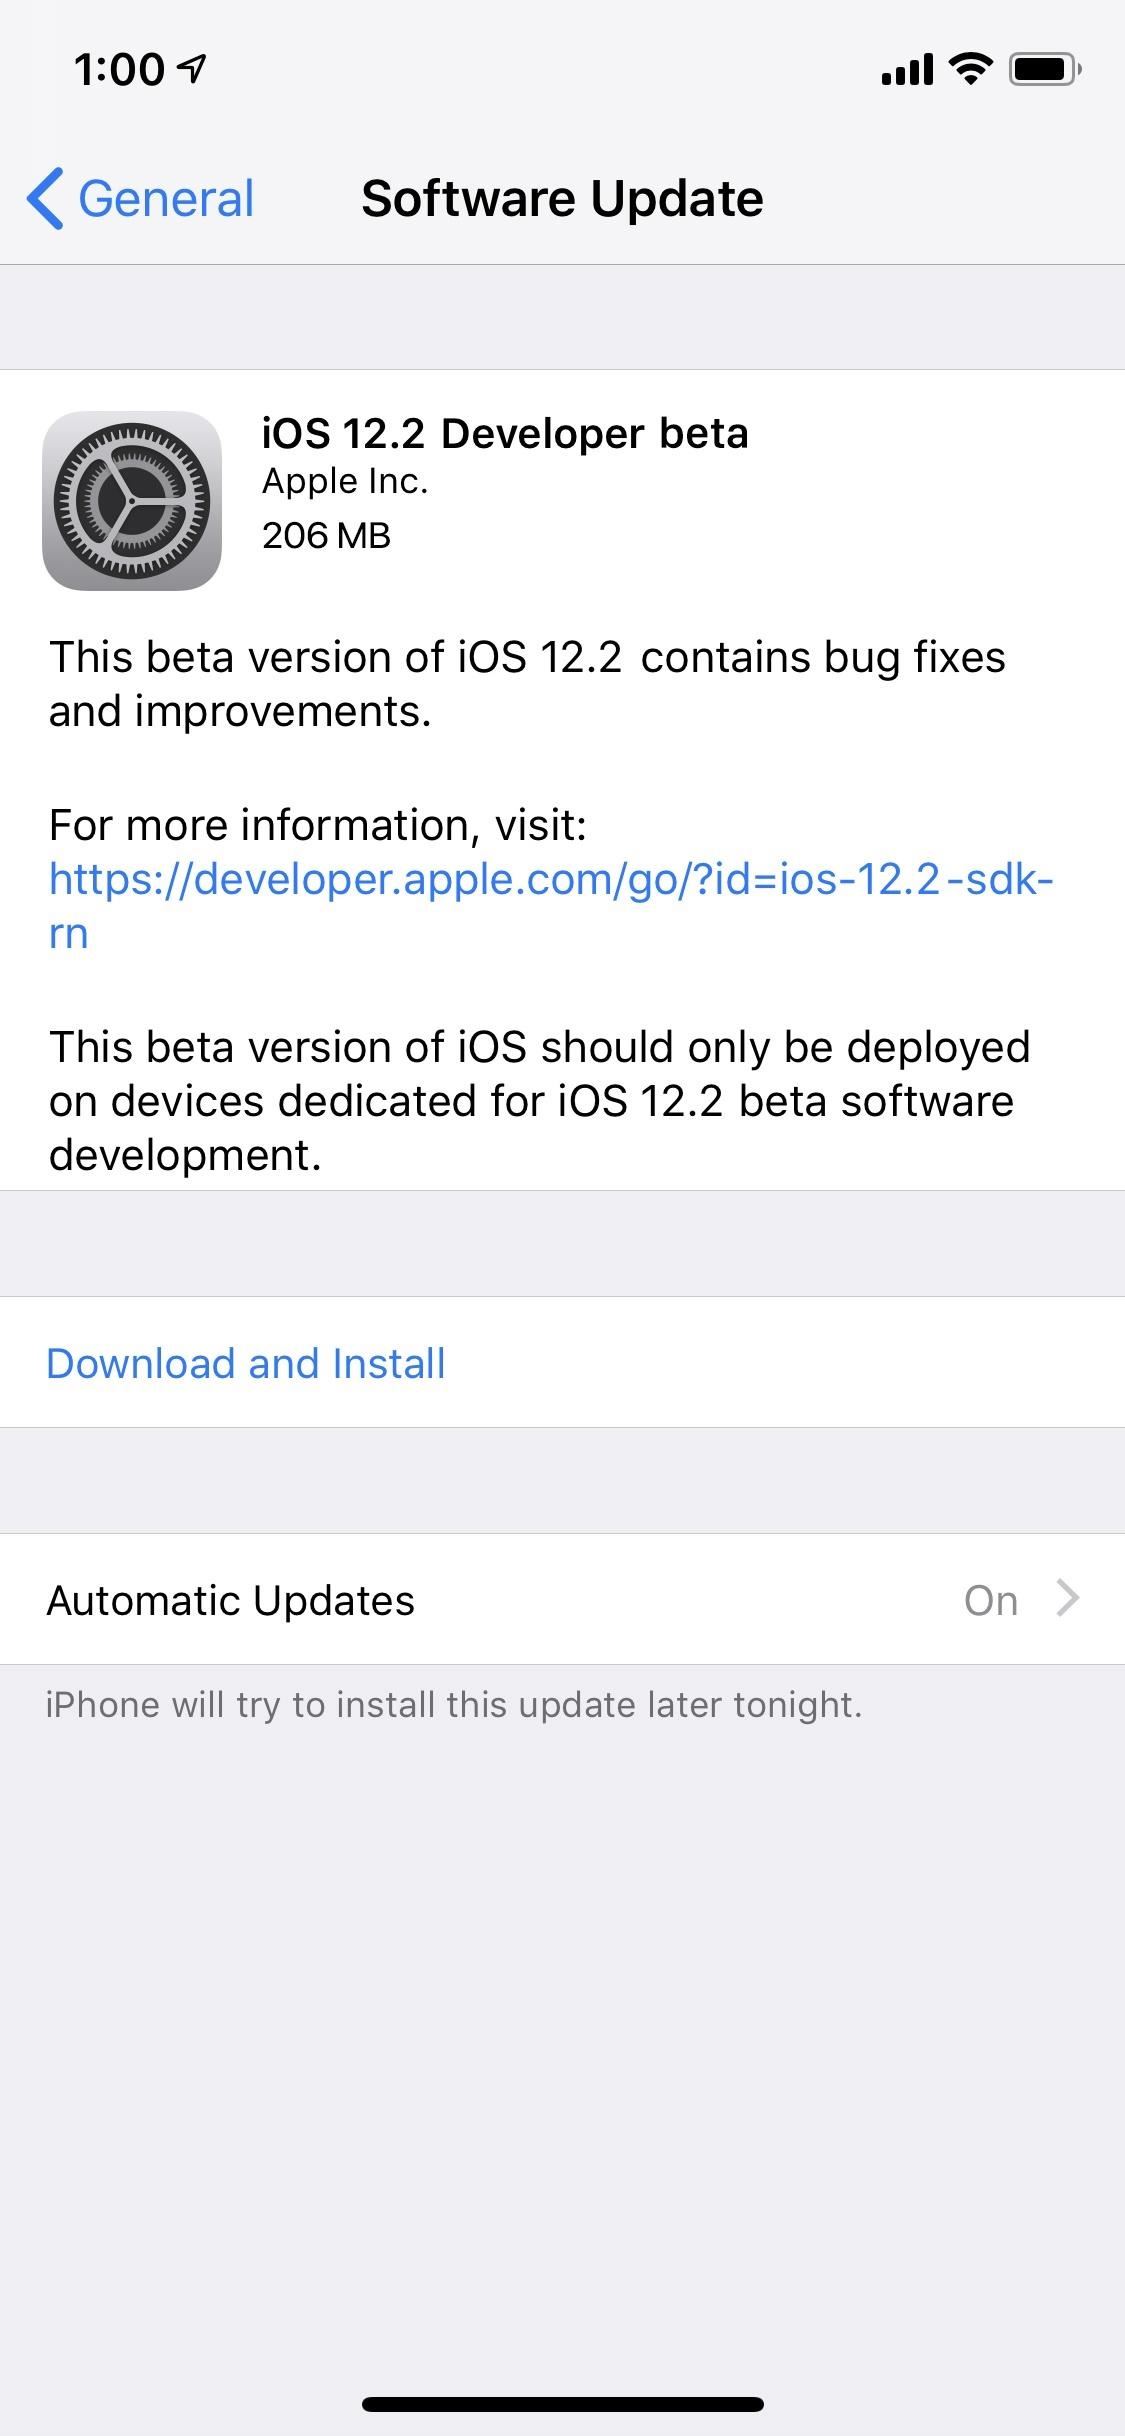 Apple Just Released the First iOS 12.2 Beta for iPhone to Developers